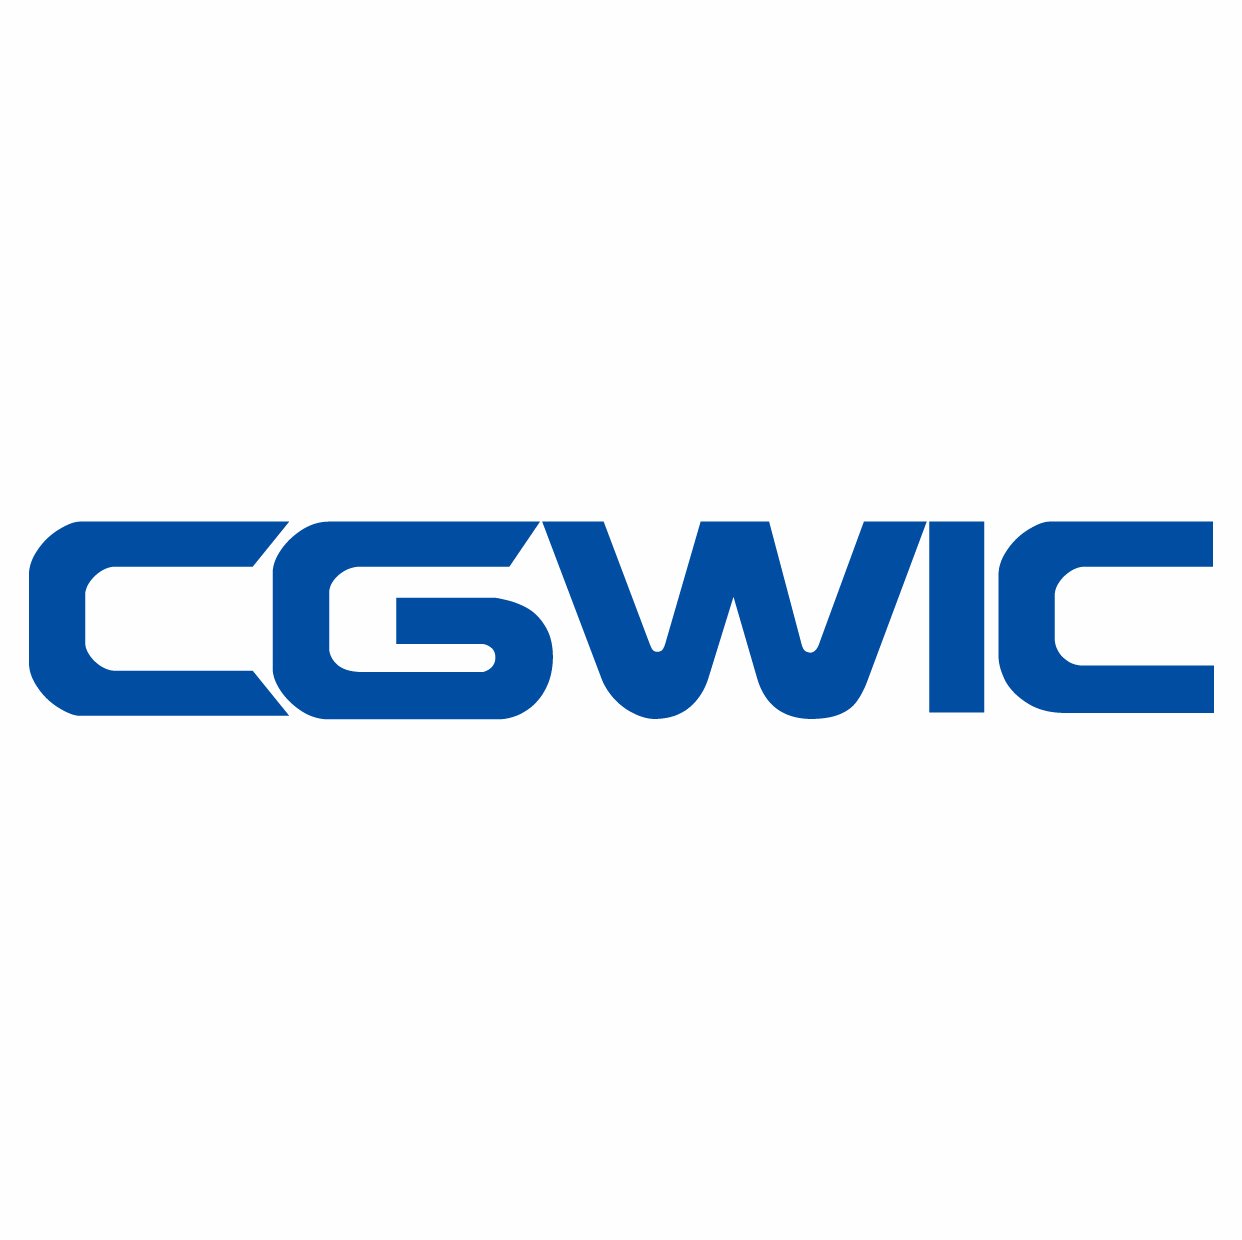 CGWIC is the sole company authorized by the Chinese government to provide satellites, commercial launch services and international space cooperation.